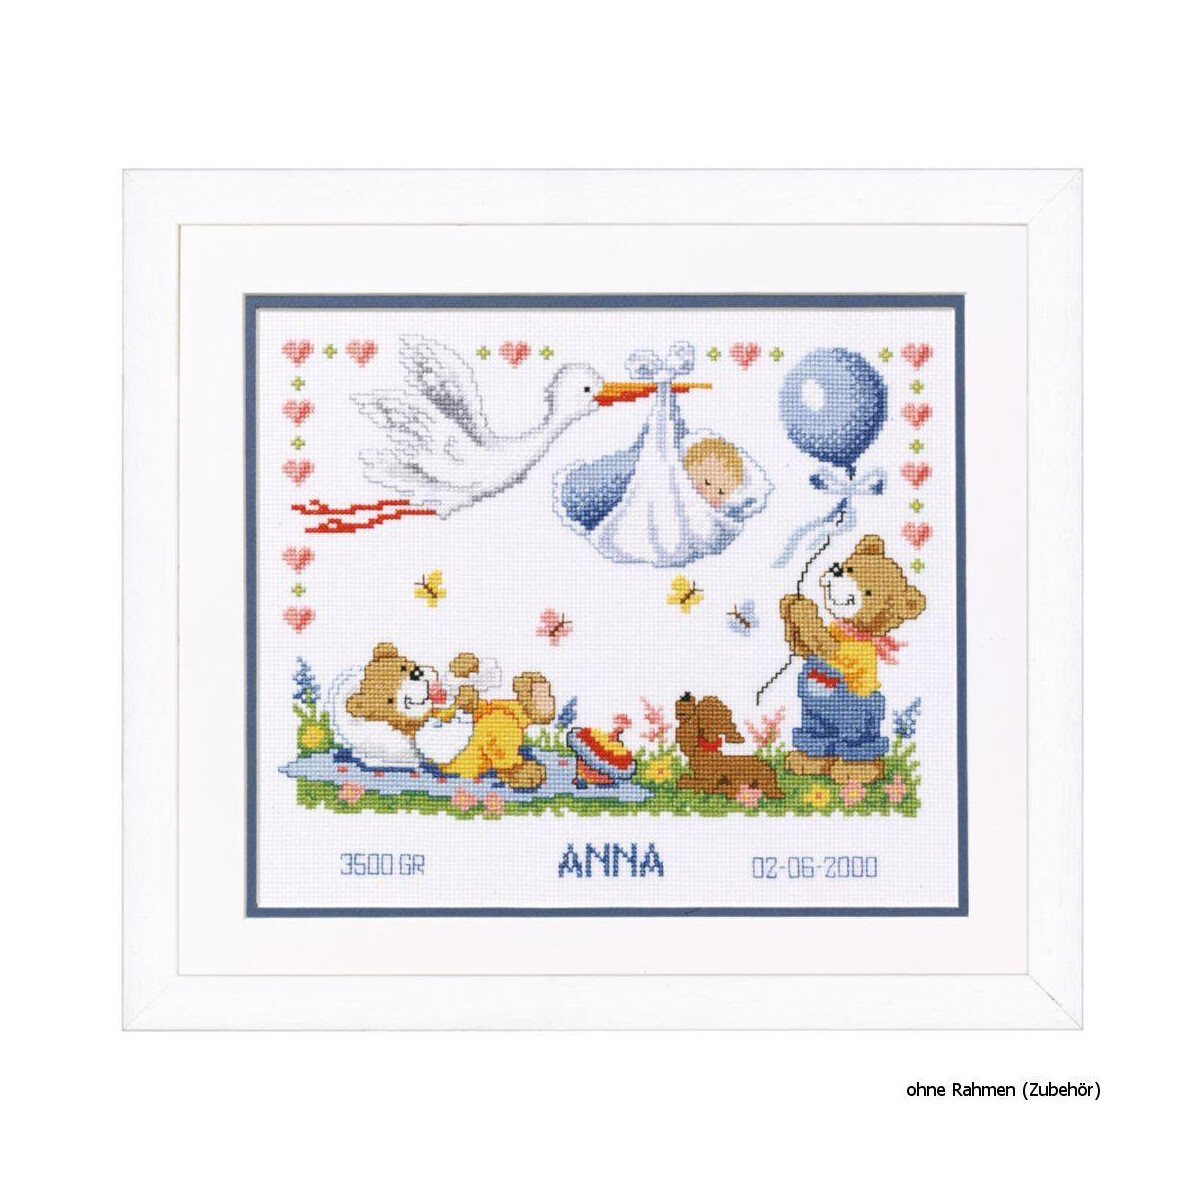 Vervaco Counted cross stitch kit Stork brings baby, DIY